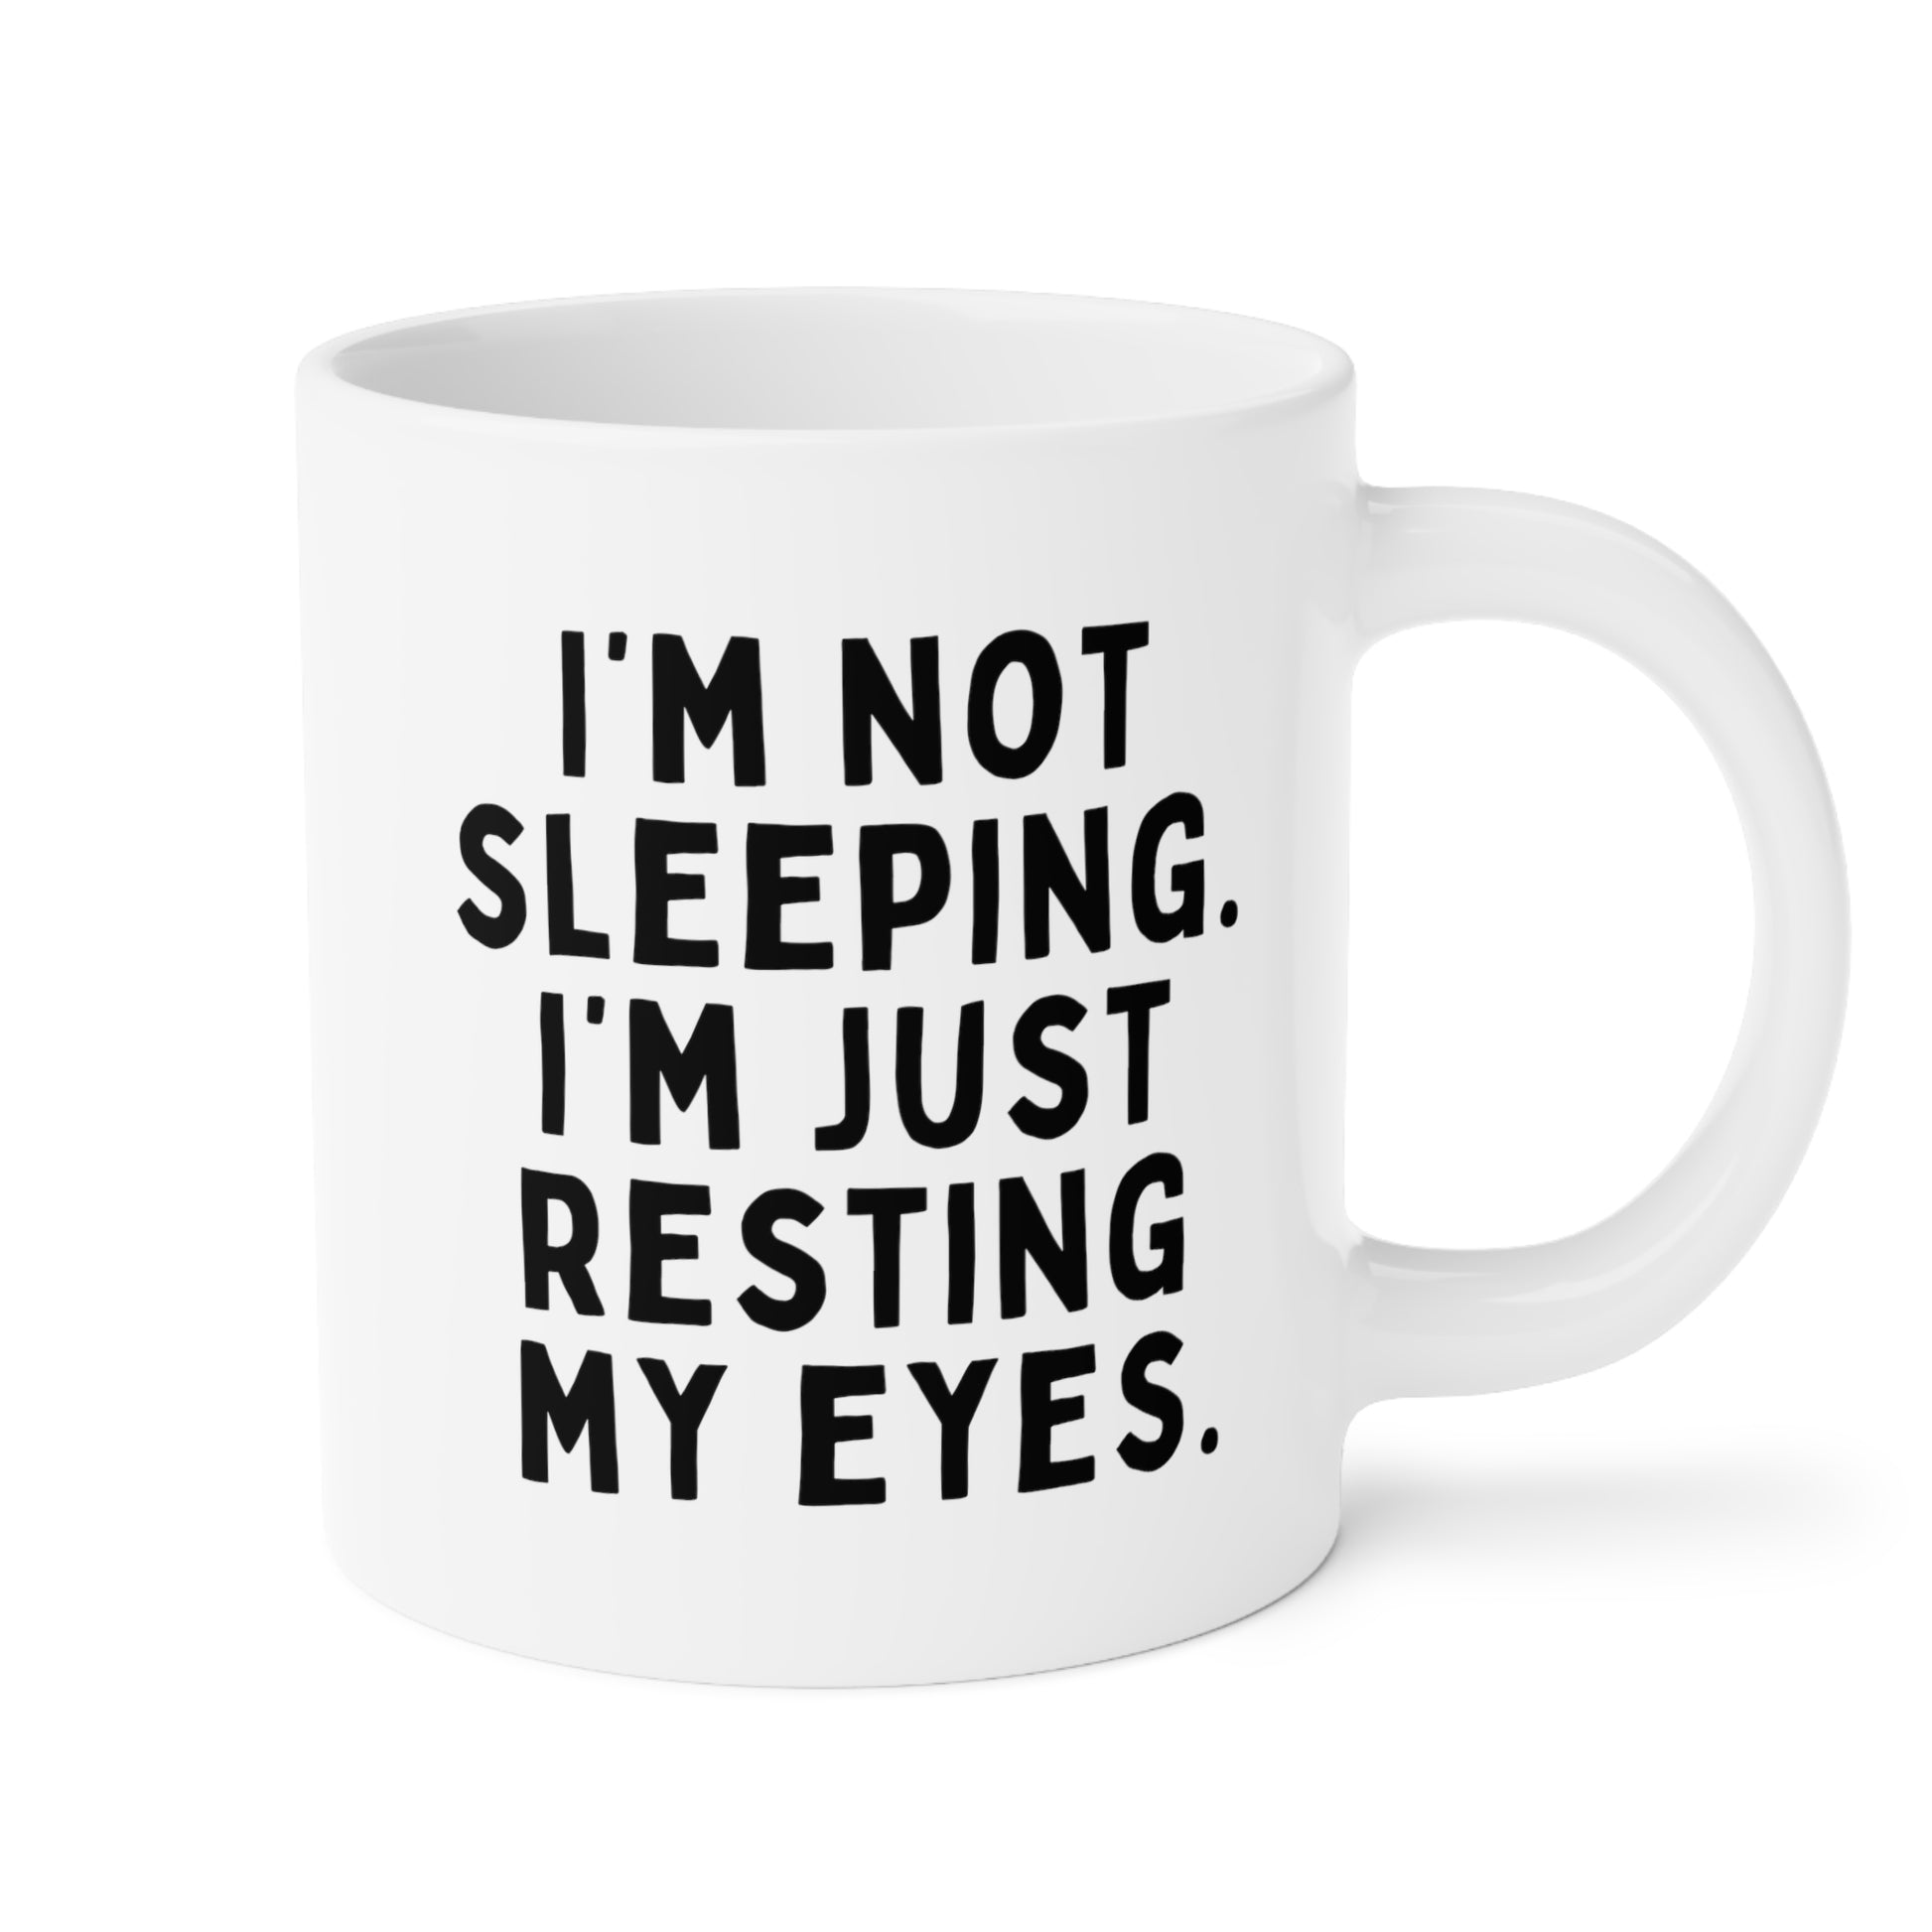 I'm Not Sleeping. I'm Just Resting My Eyes. 20oz white funny large coffee mug gift for dad fathers day daddy husband grandpa cup him waveywares wavey wares wavywares wavy wares